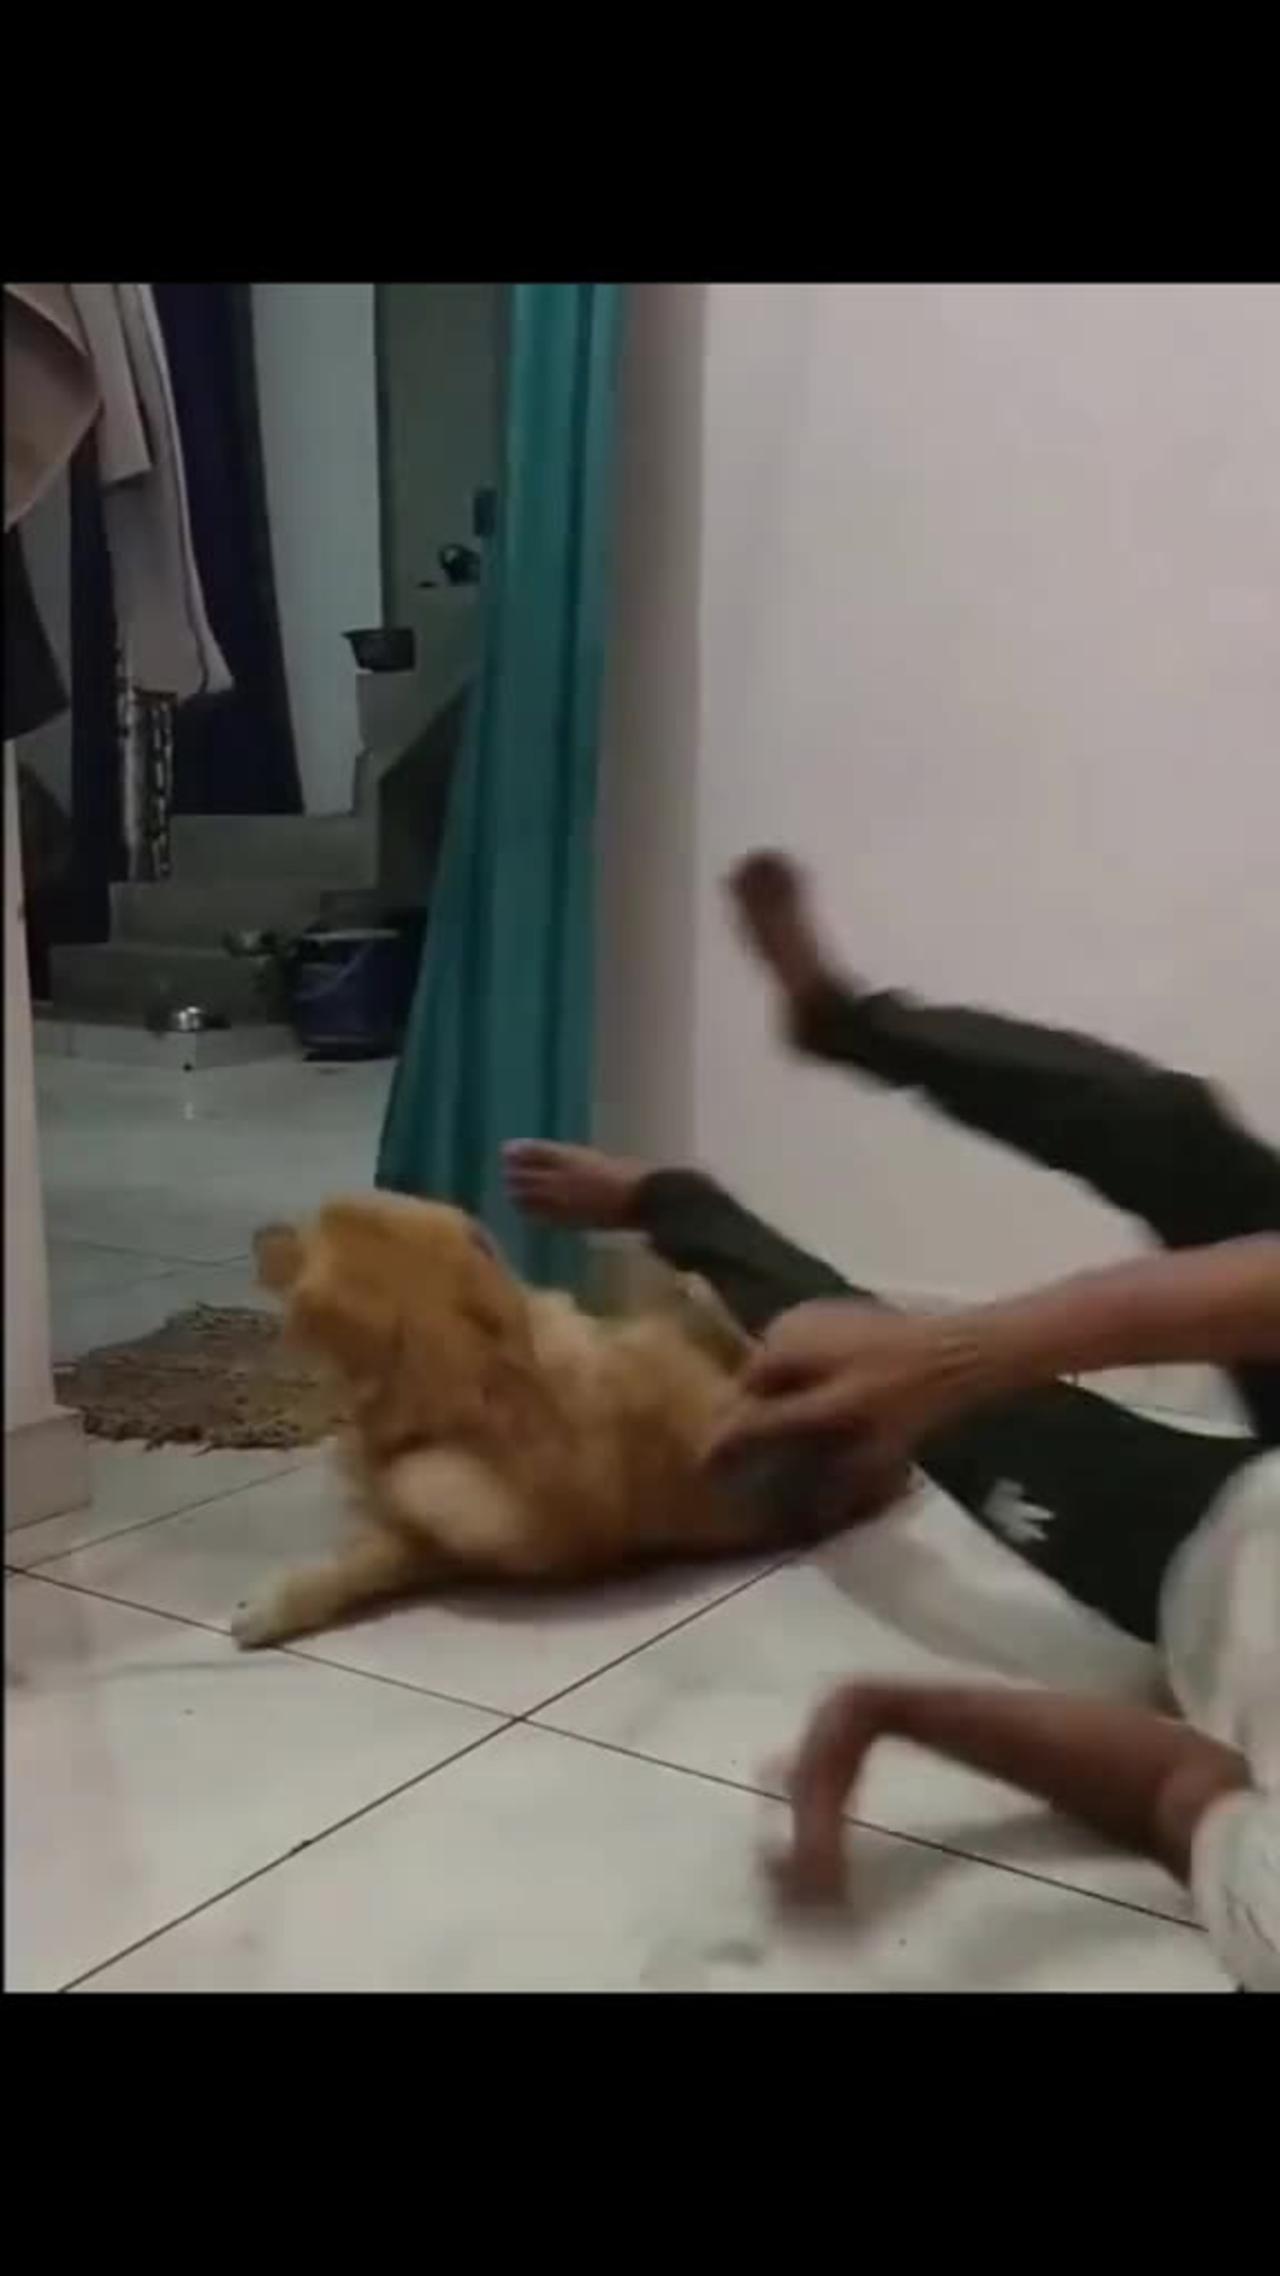 The end funny cute #funny #funnyvideos #animals #viral #pet #cat #dog #foryou #wee #haha